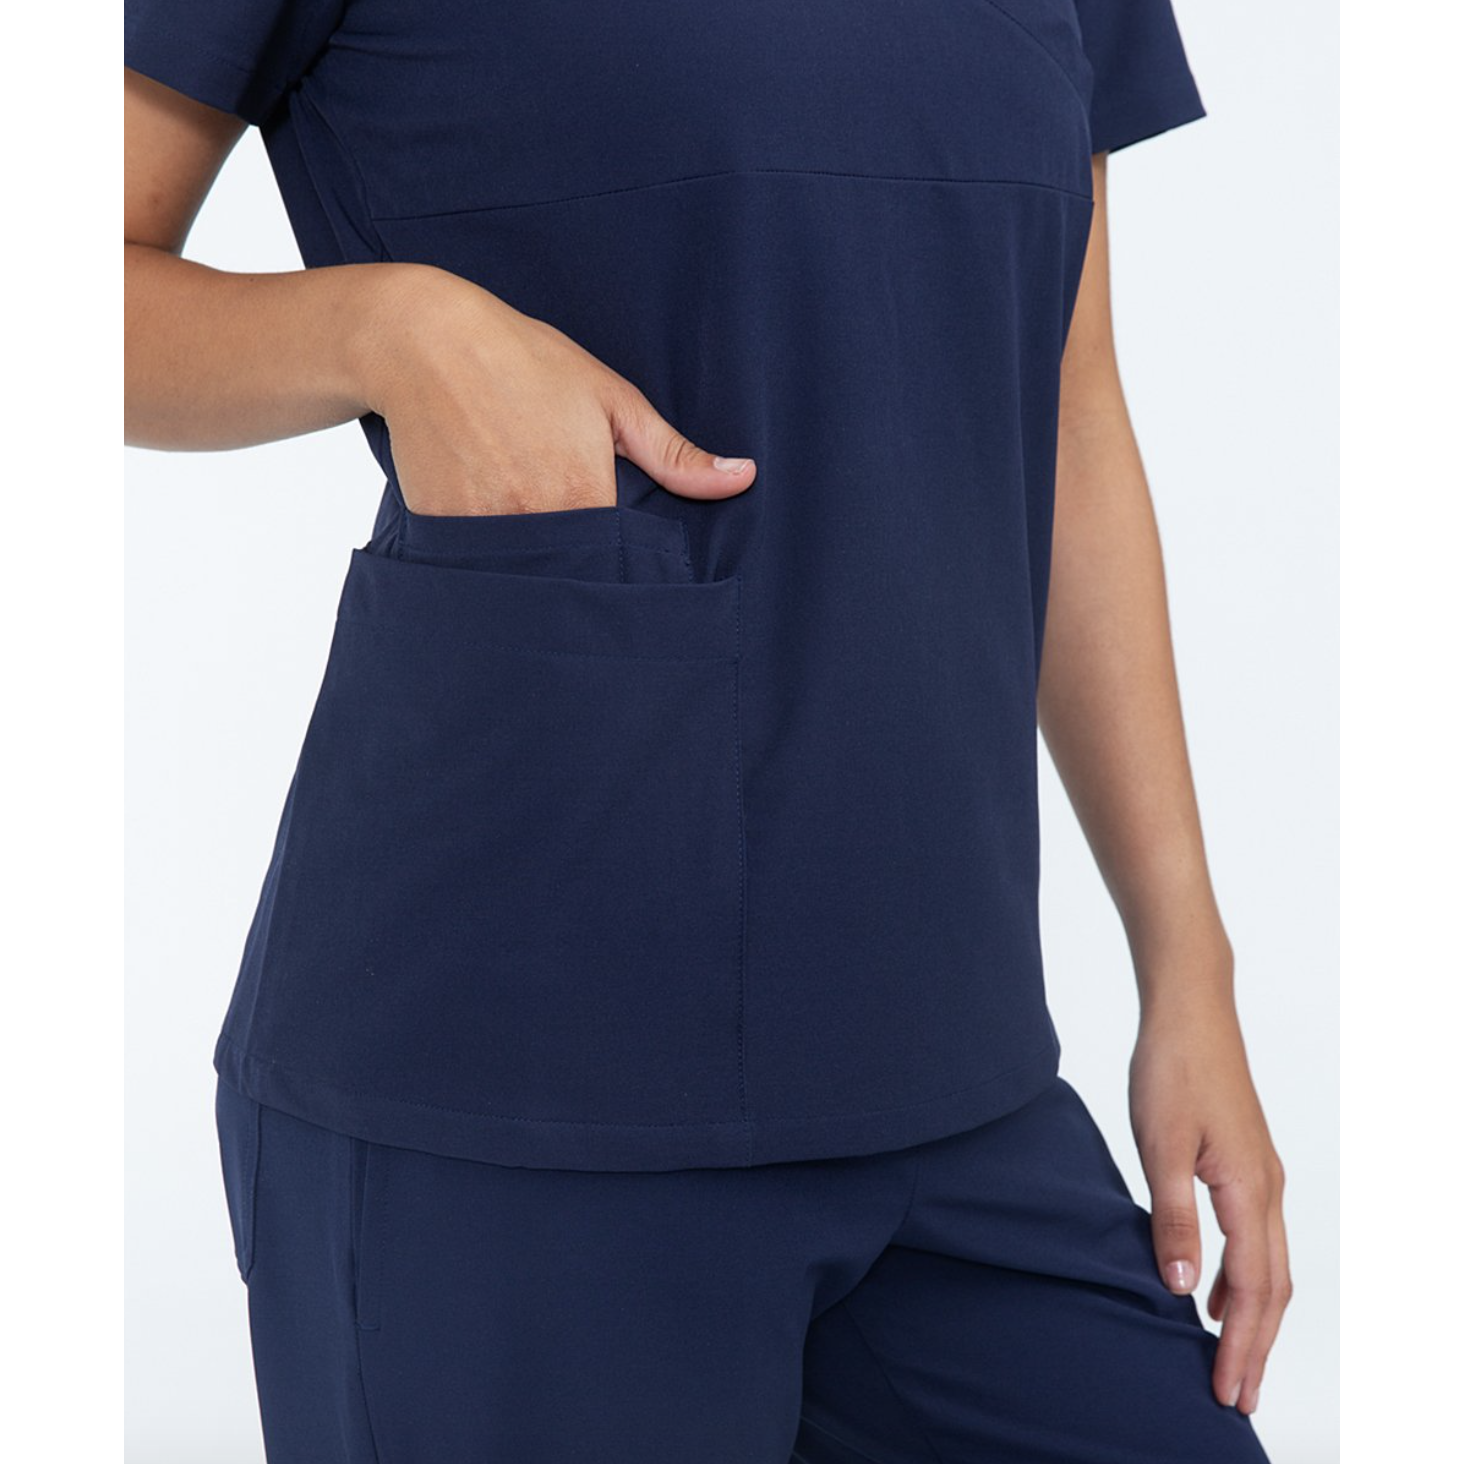 BUY ANY 3 KALEA AND GET 1 FREE KALEA DEAL* Scrub Top Women's Water Resistant & Four Way Stretch Reverie T1 SALE